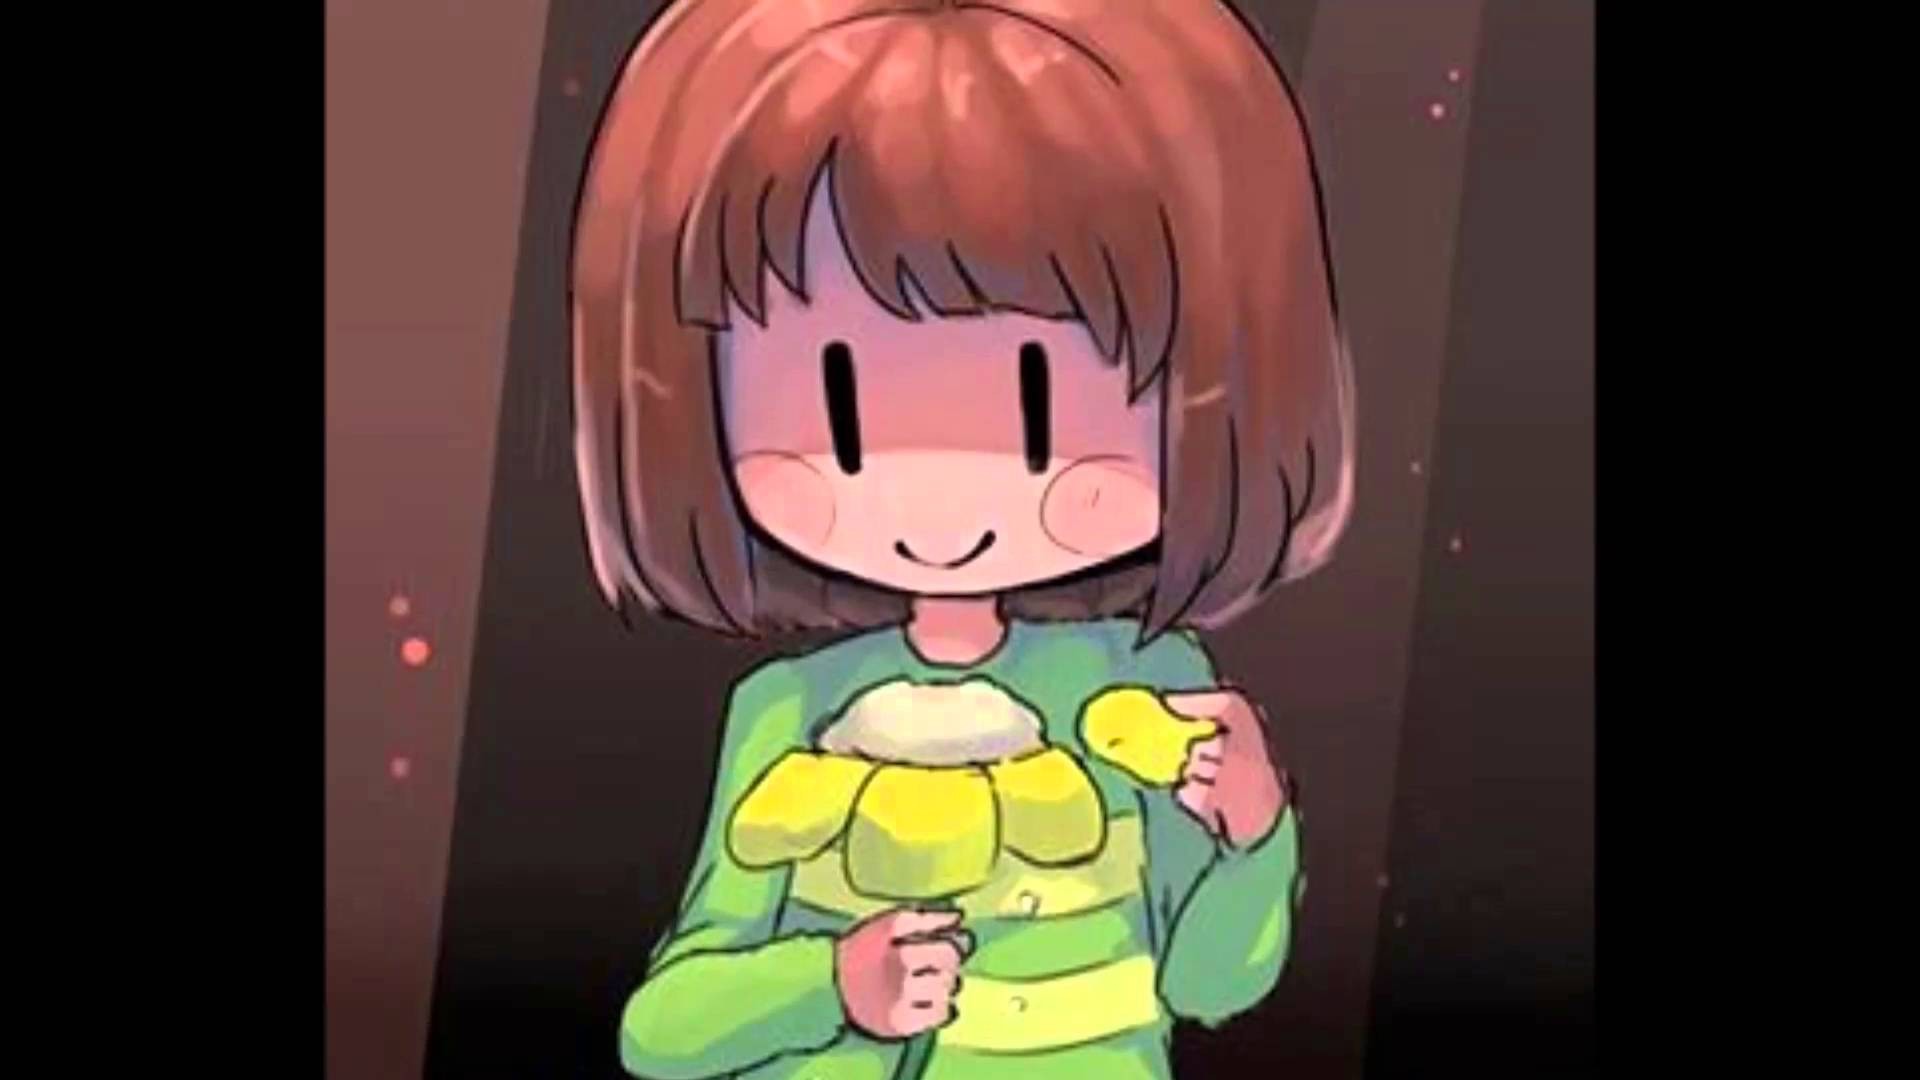 Chara Undertale Wallpapers - Wallpaper Cave